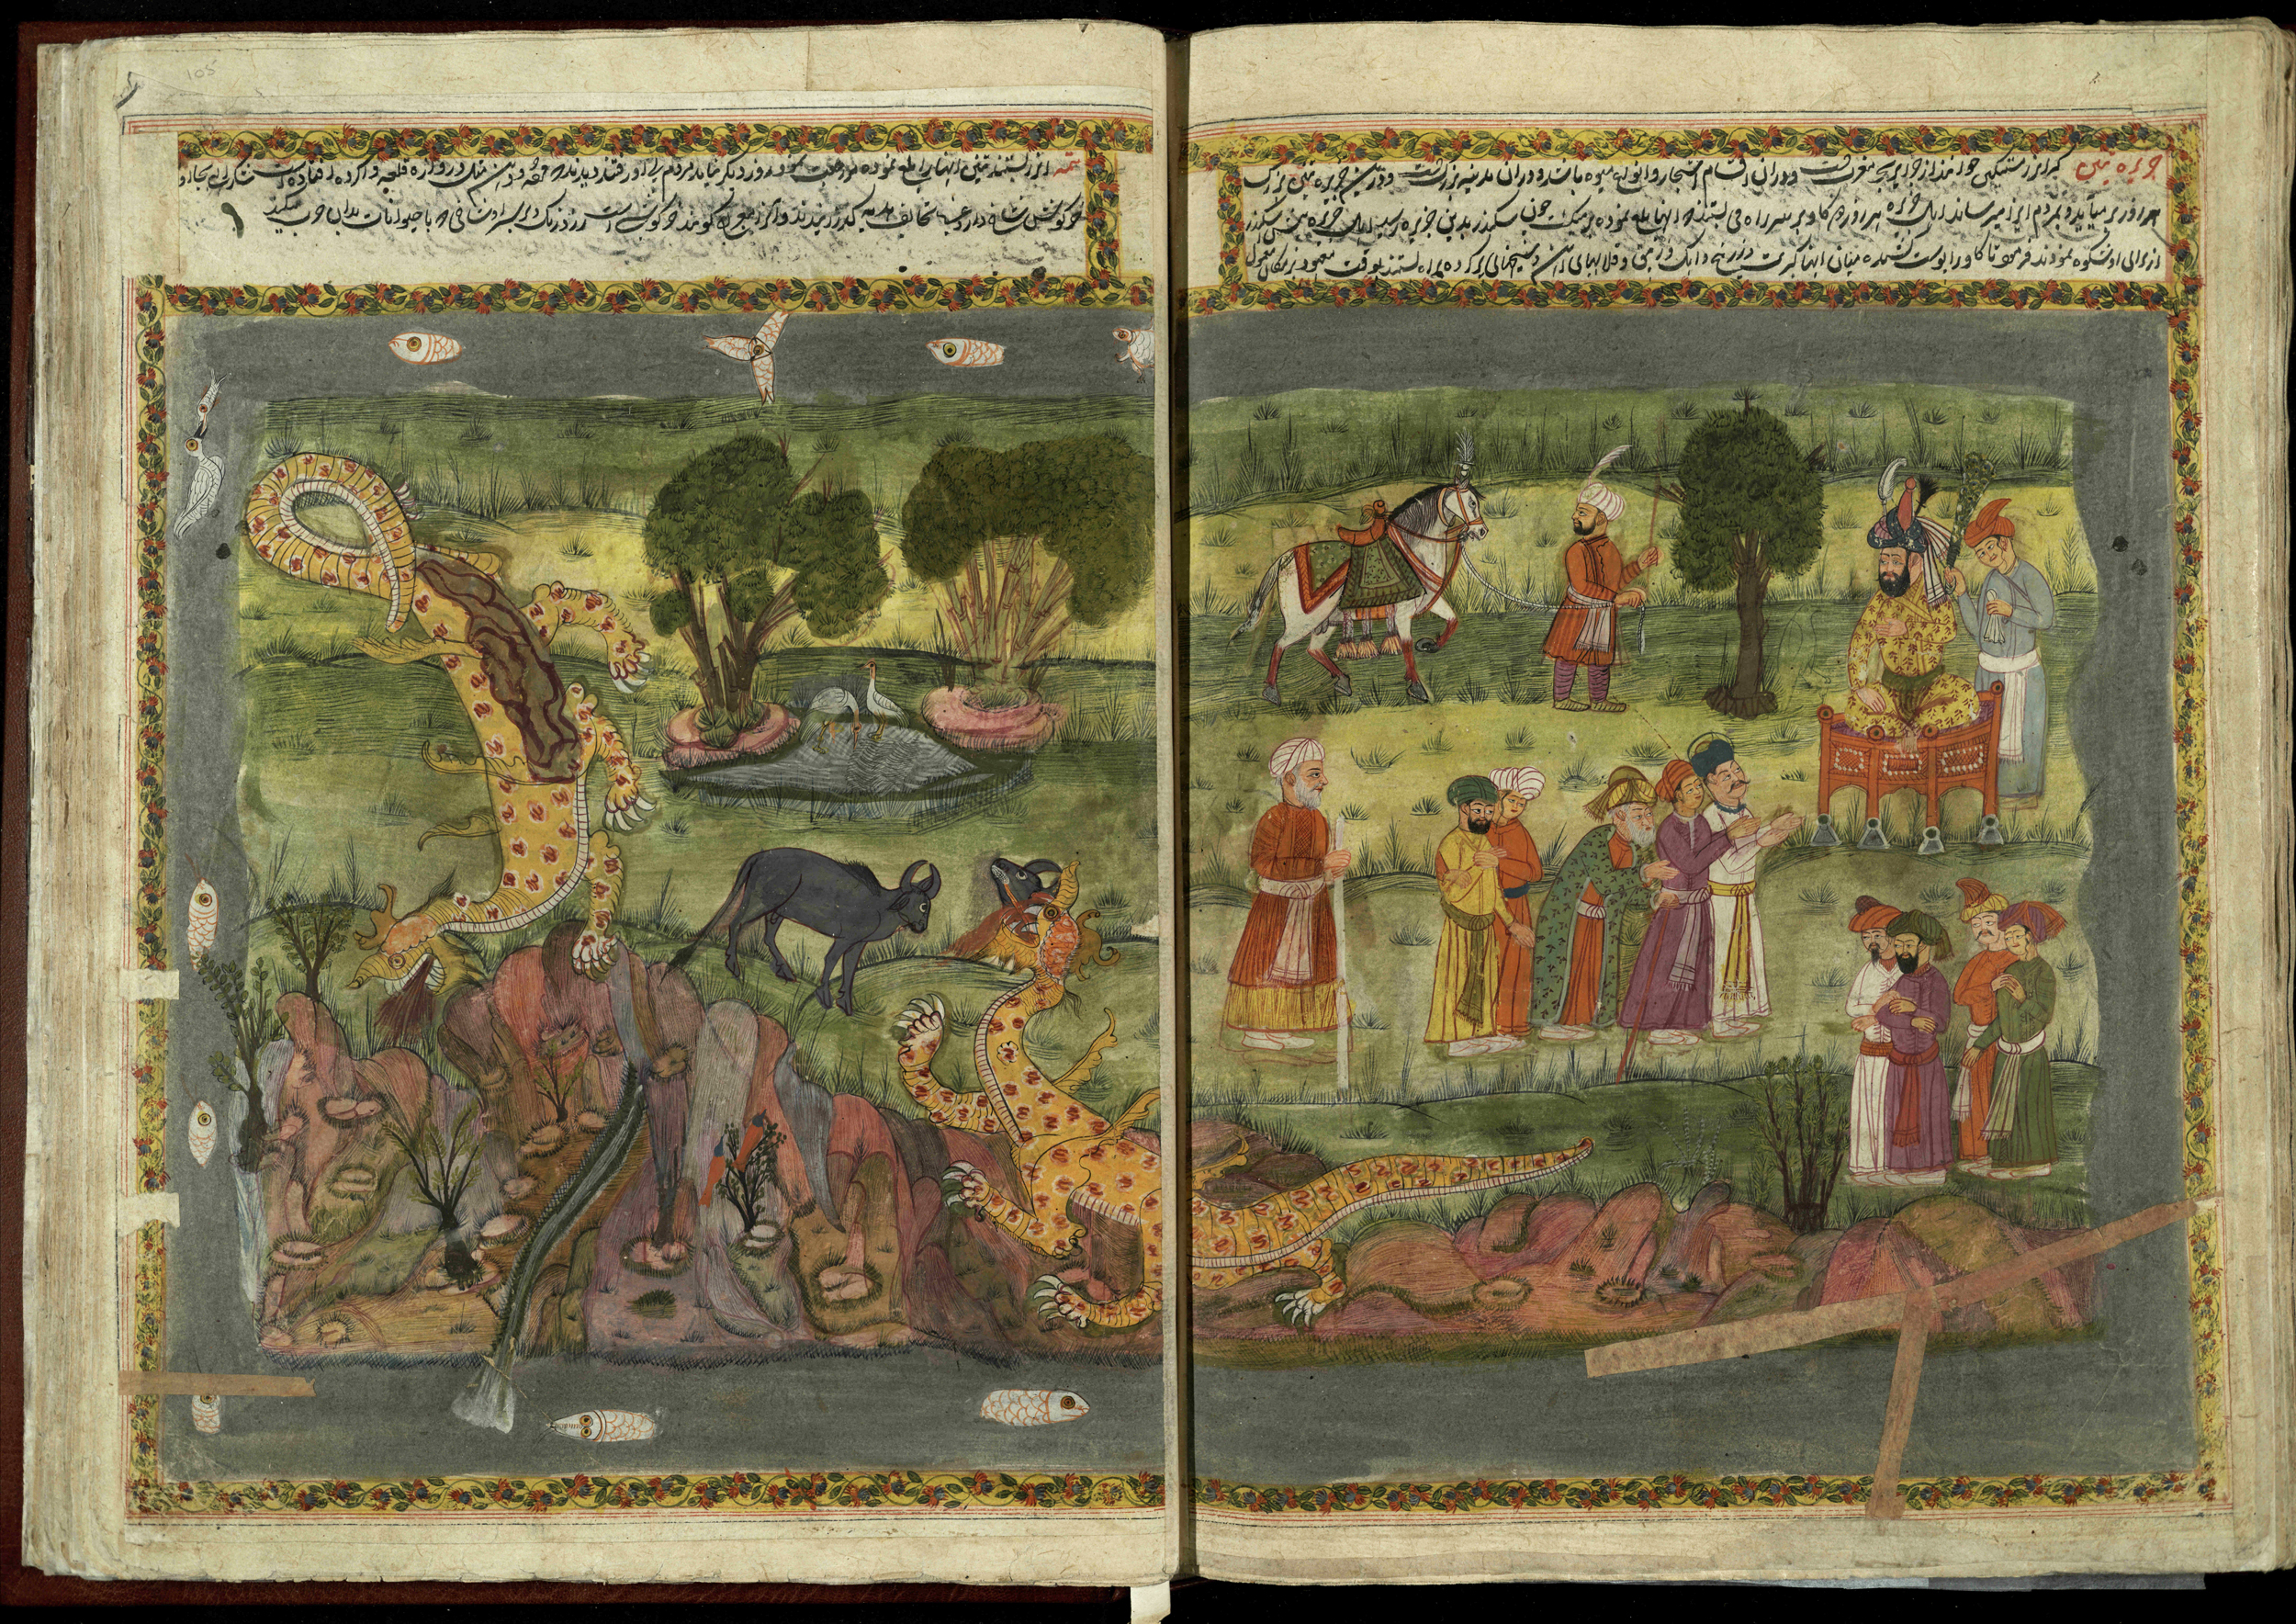 'Island of Tin, plagued by dragons,' from 17th or 18th century manuscript copy of “The Book of Wonders of the Age” (St Andrews ms32(o))